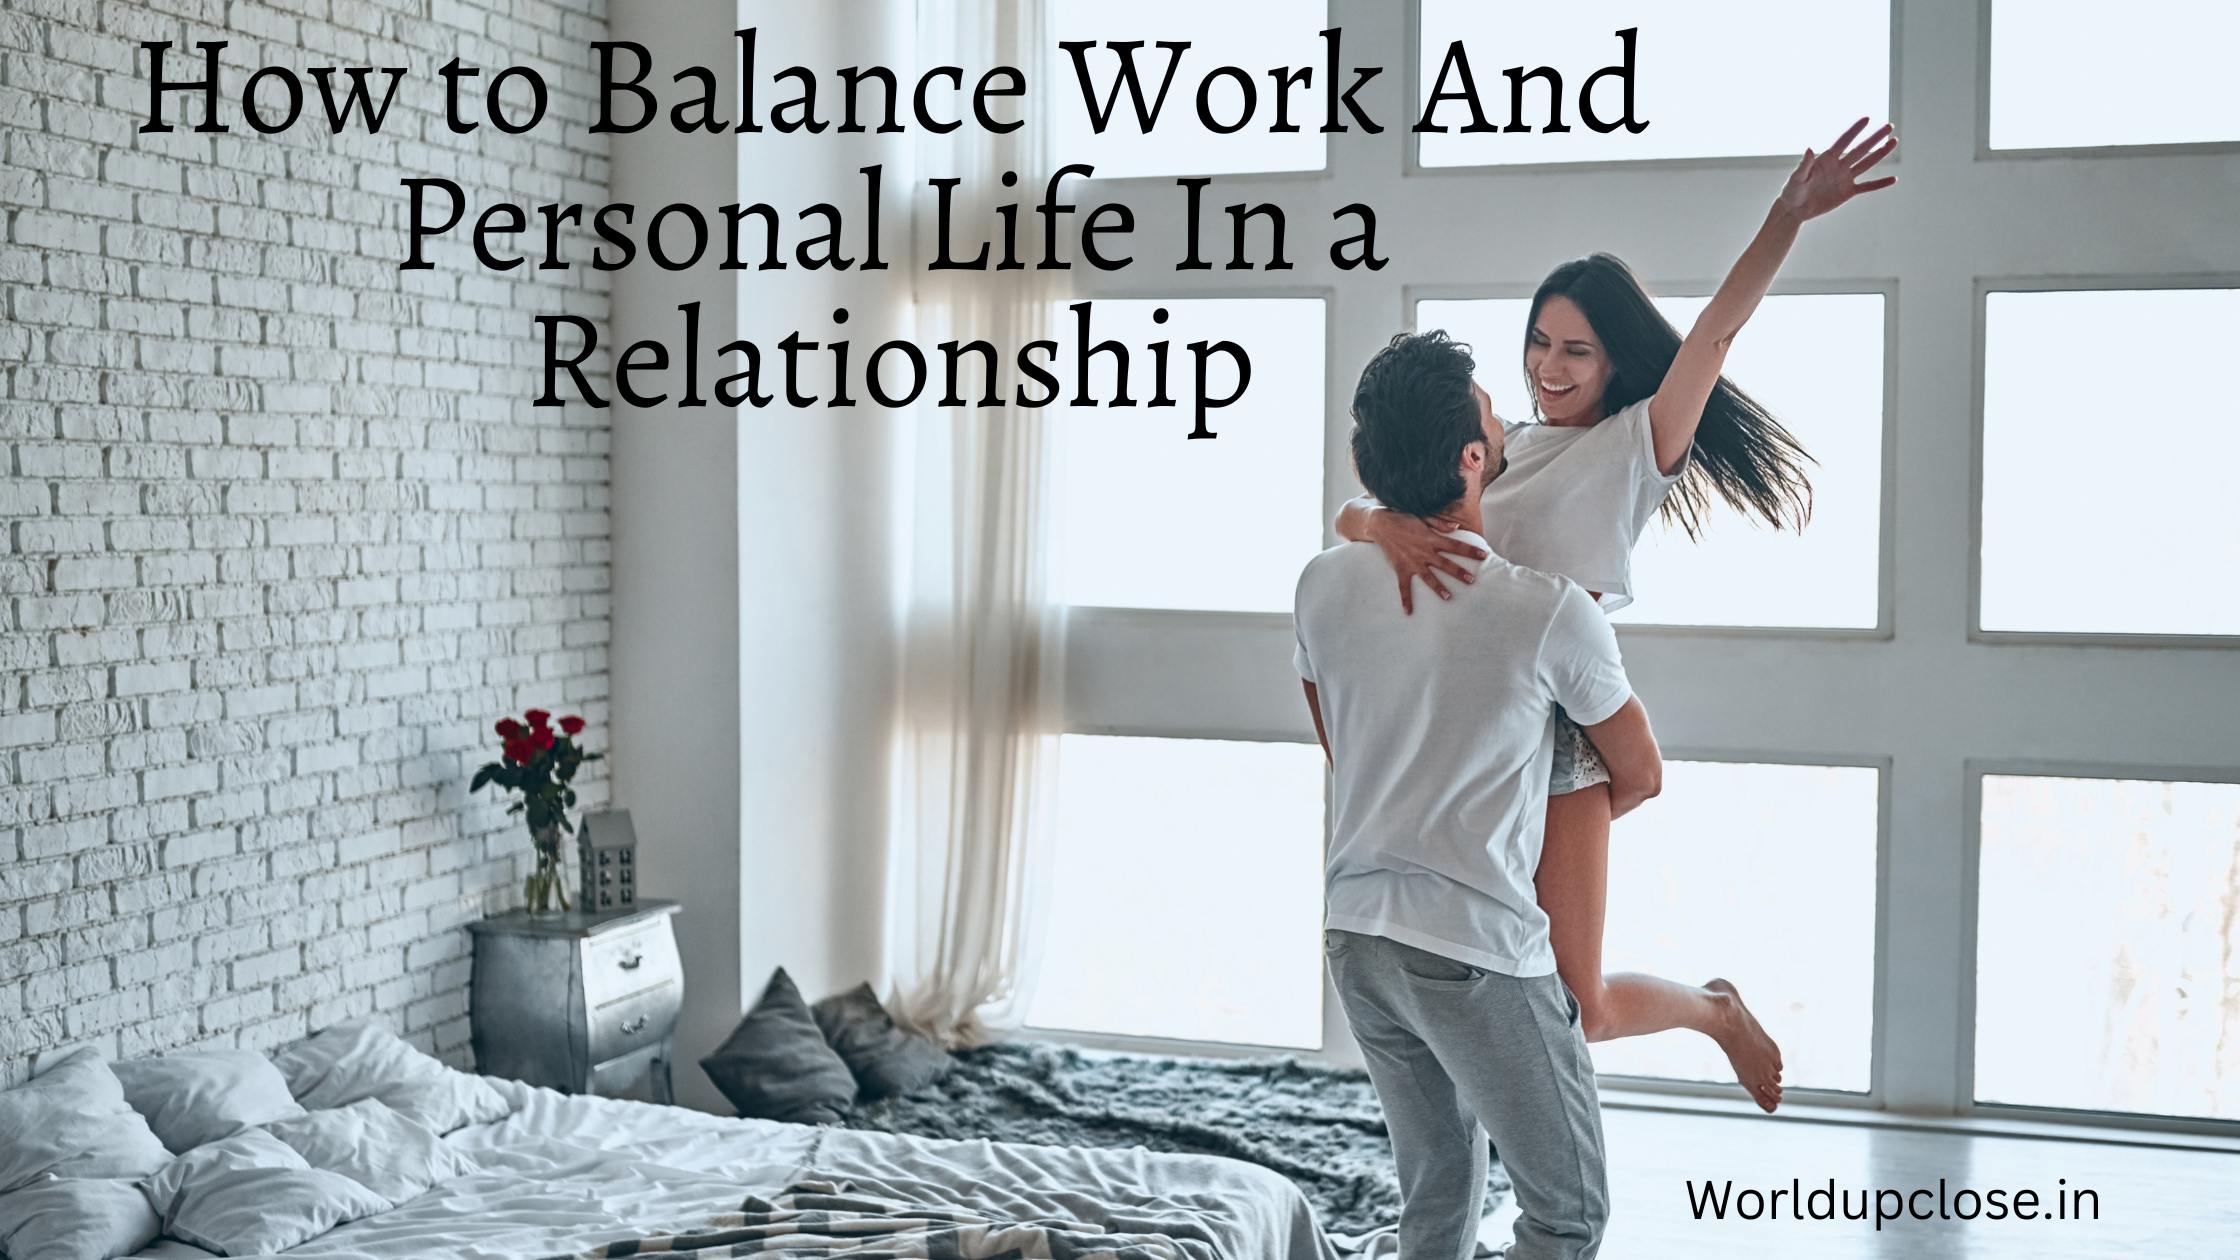 11 Ways to Balance Work and Personal Life in a Relationship 6